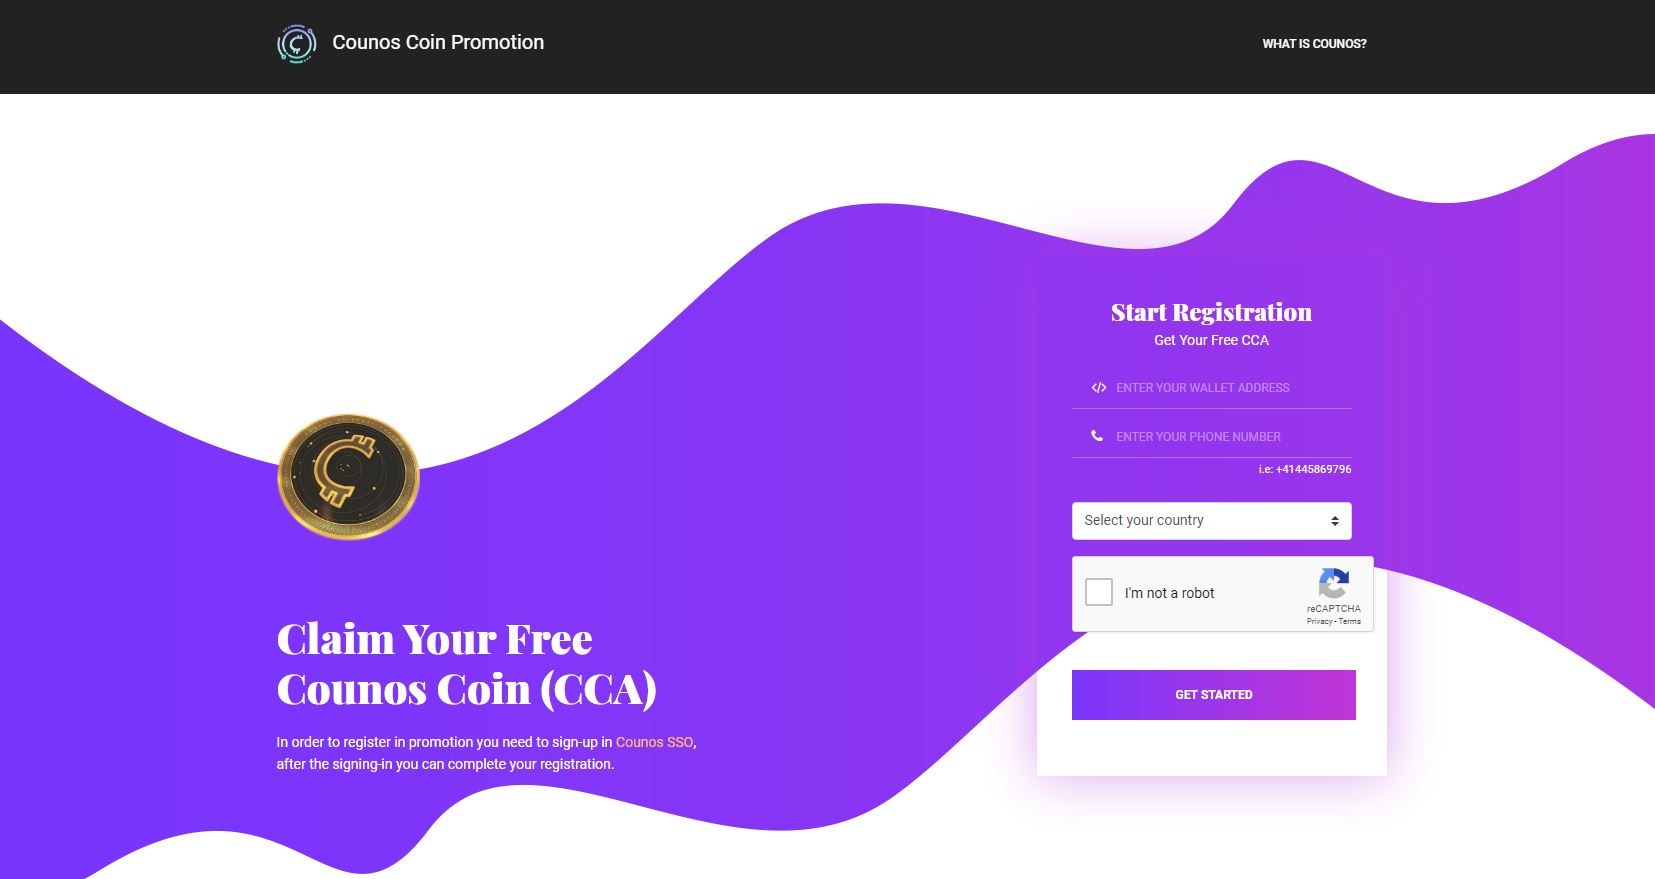 go to the main page of promotion and as you can see in the picture enter your wallet address for Counos Coin, a valid phone number, and the country of your residence.